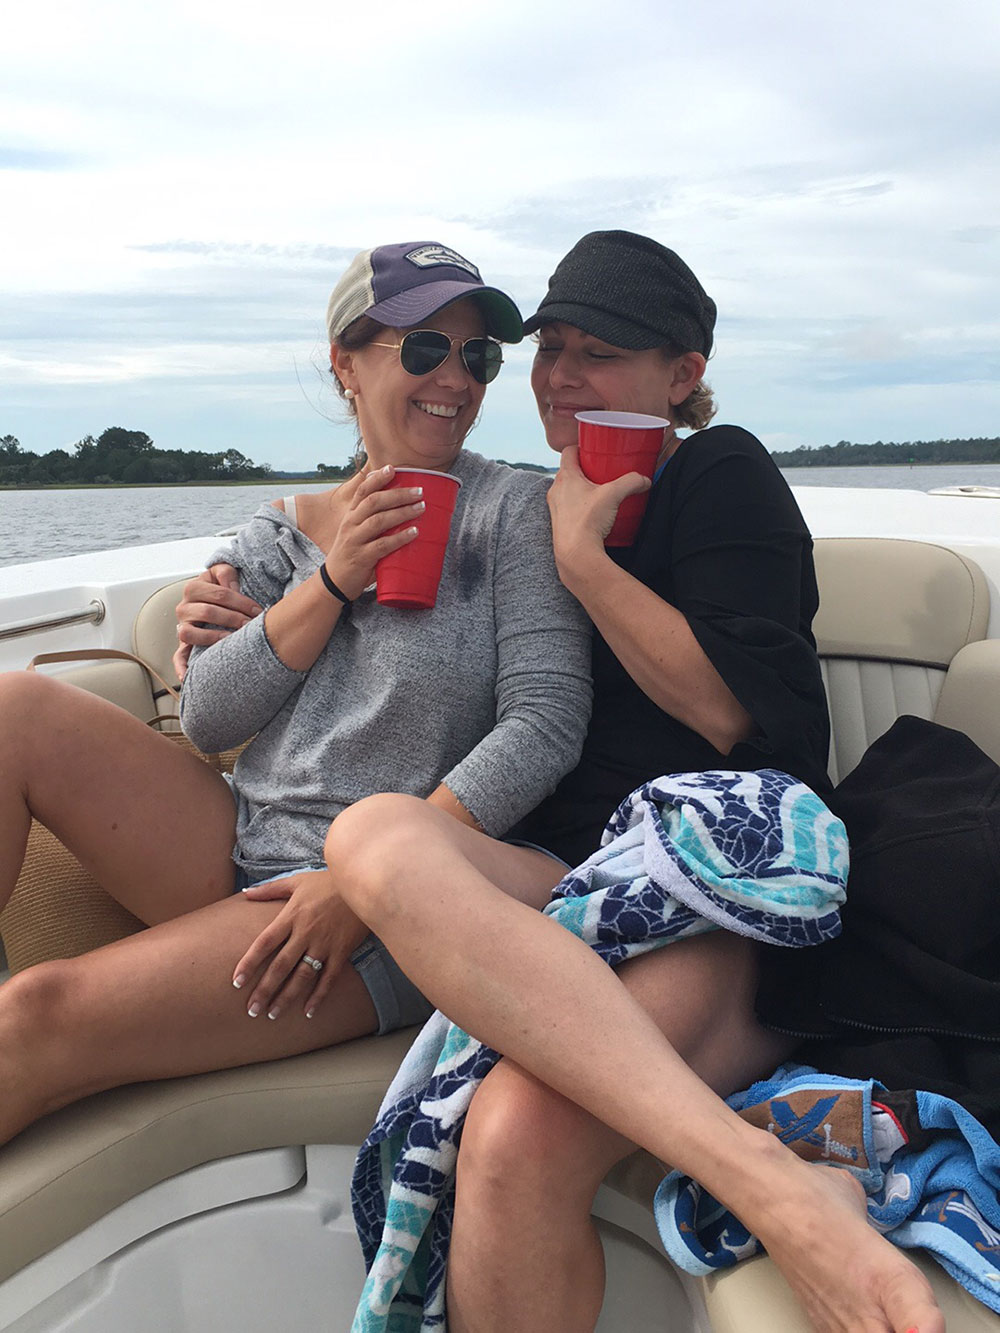 Two women with red plastic drink cups sitting together on a boat